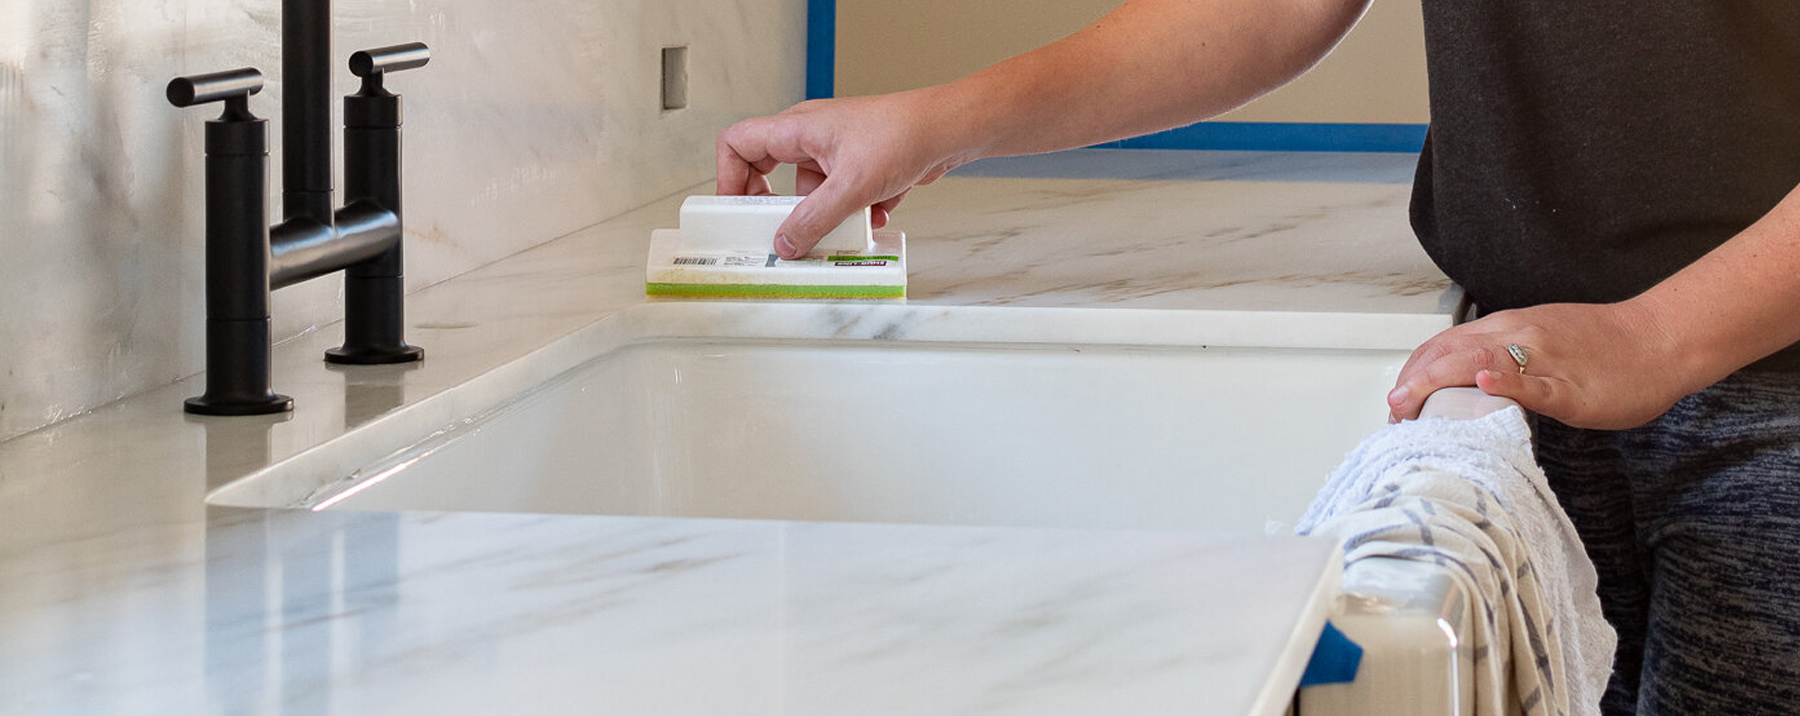 Tips for sealing and cleaning marble & granite countertops